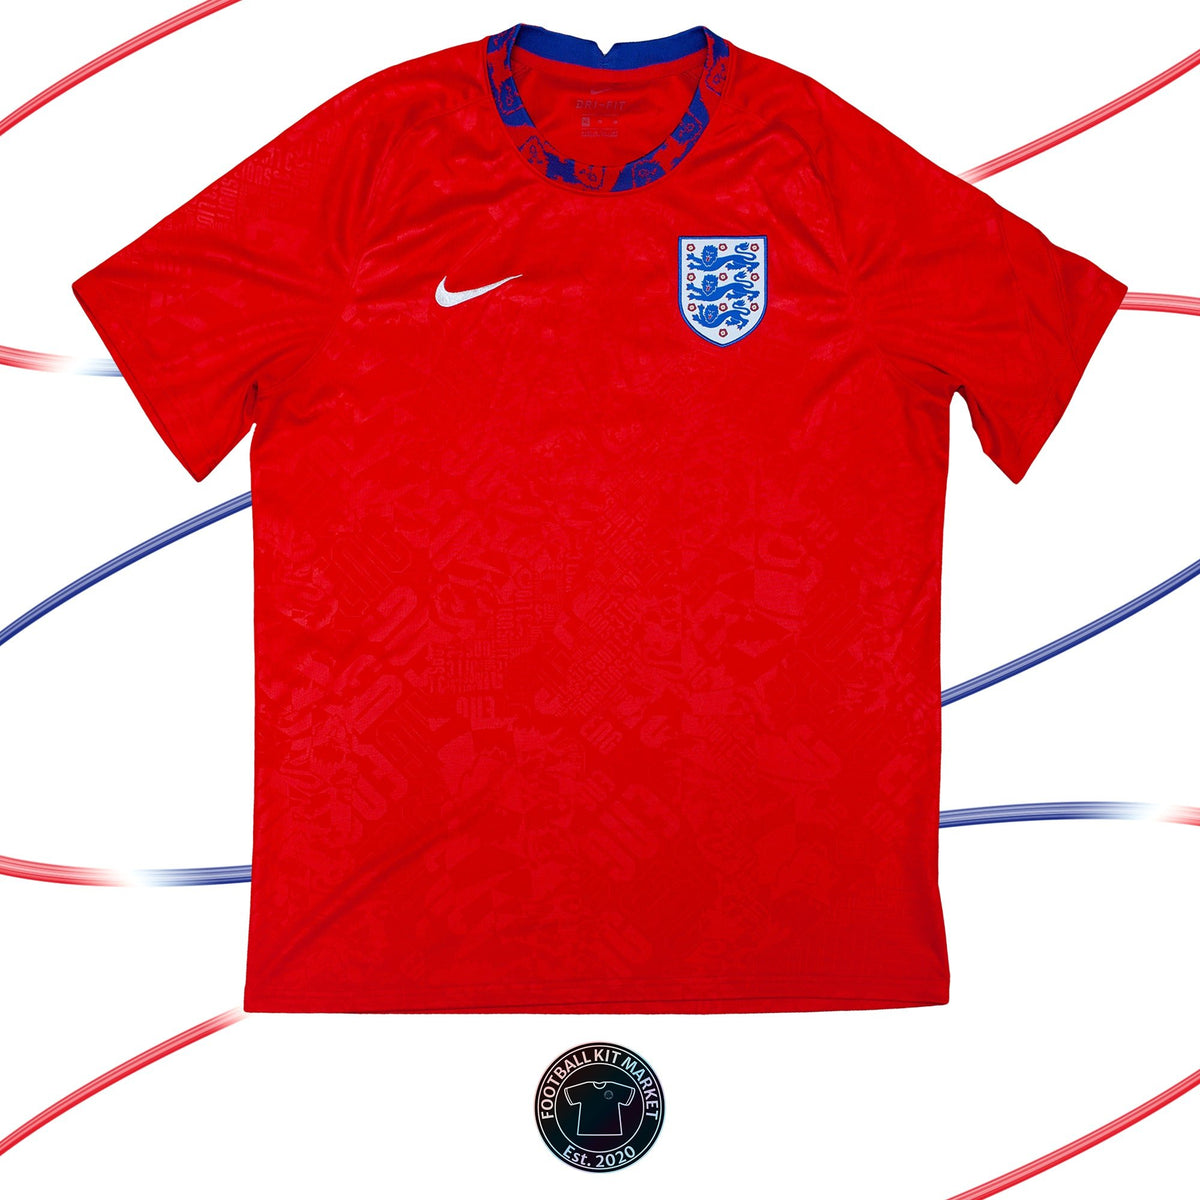 Genuine ENGLAND Pre-Match Shirt (2020-2021) - NIKE (XL) - Product Image from Football Kit Market